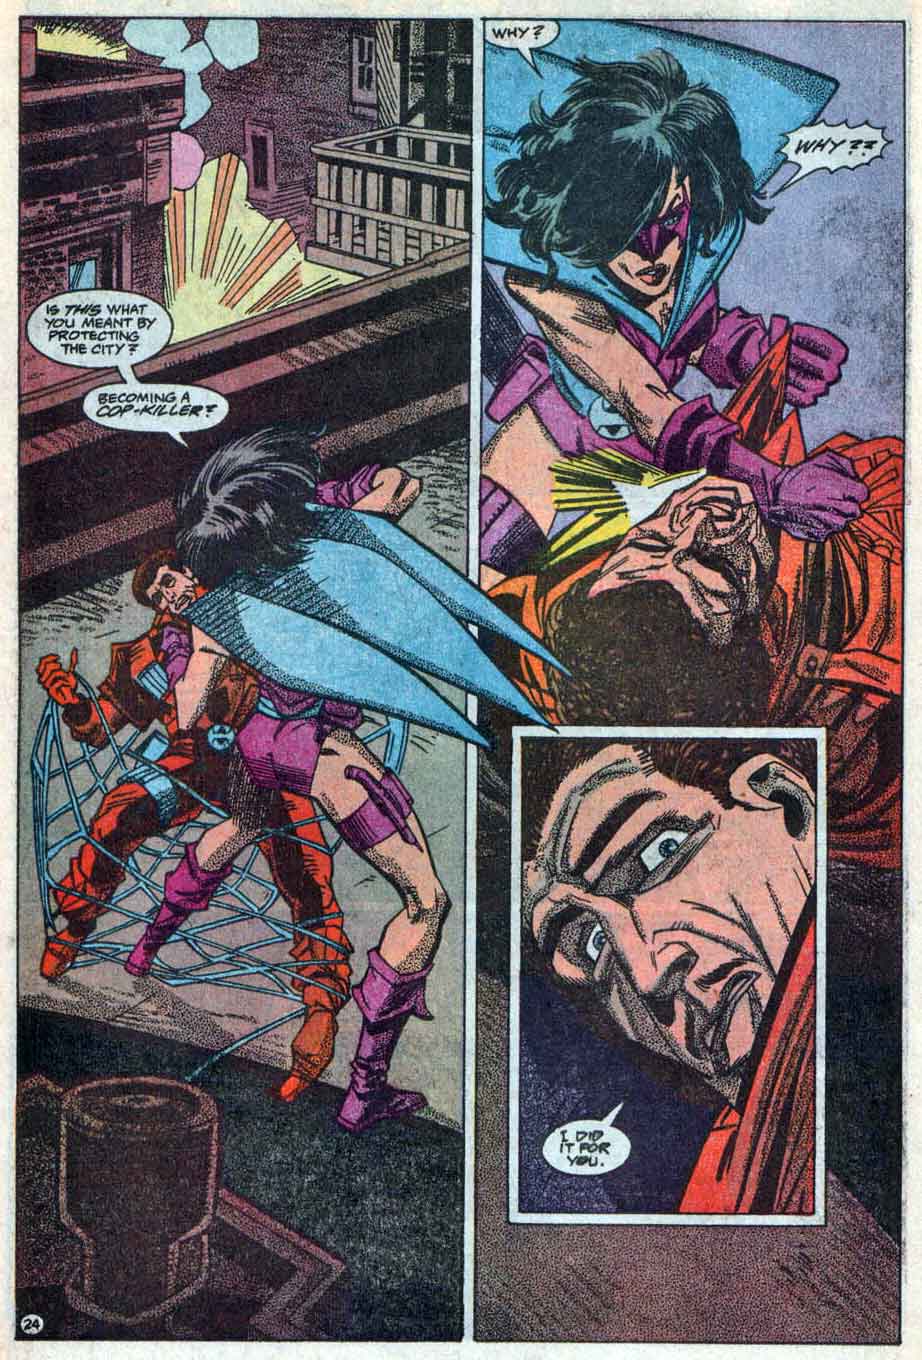 Justice League International Special #2 featuring the Huntress by Joey Cavalieri, Joe Staton and Pablo Marcos